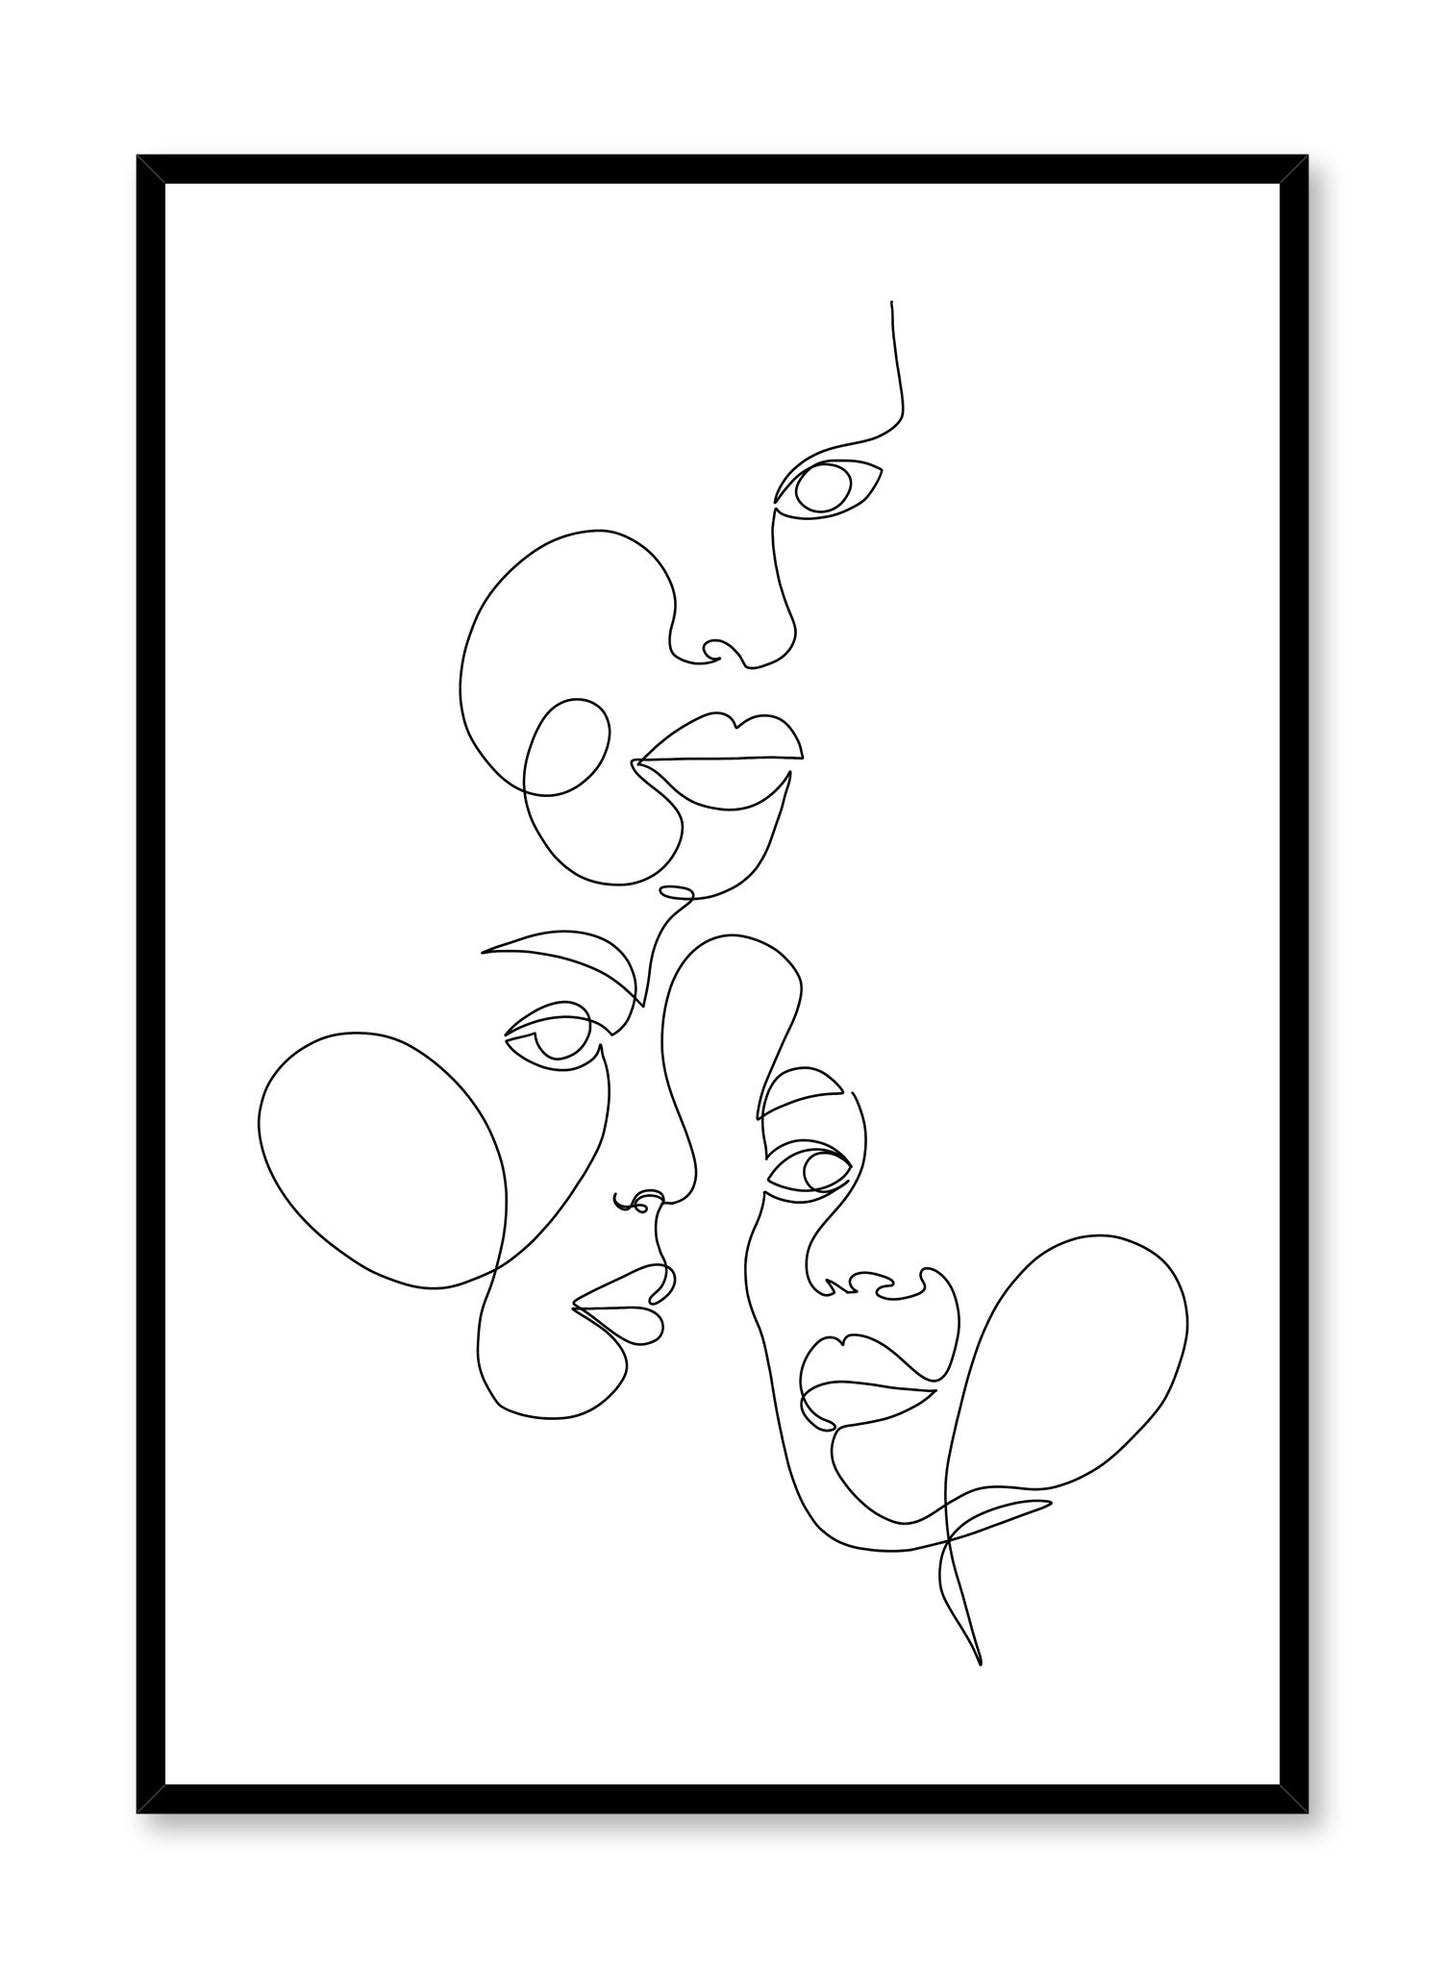 Modern minimalist abstract poster by Opposite Wall with line art faces design by Shatha Al Dafai